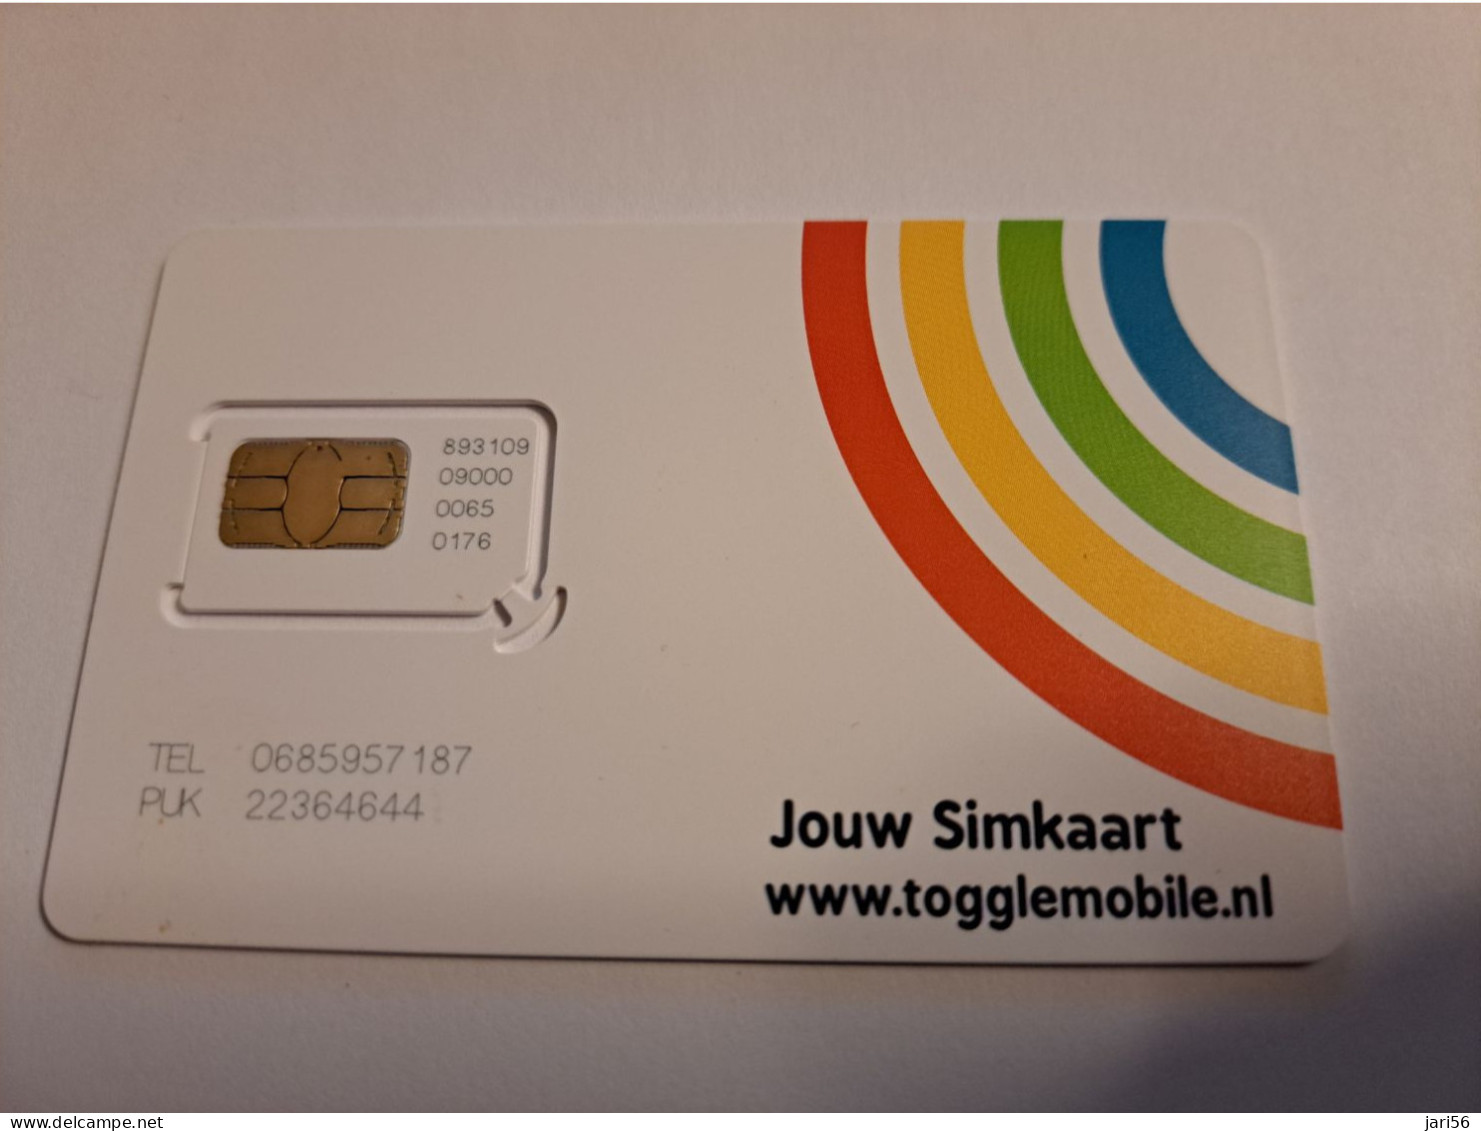 NETHERLANDS  GSM SIM CARD /  JOUW SIMKAART/ TOGGLEMOBILE     ( WITH CHIP)   CARD  ** 15821** - Schede GSM, Prepagate E Ricariche